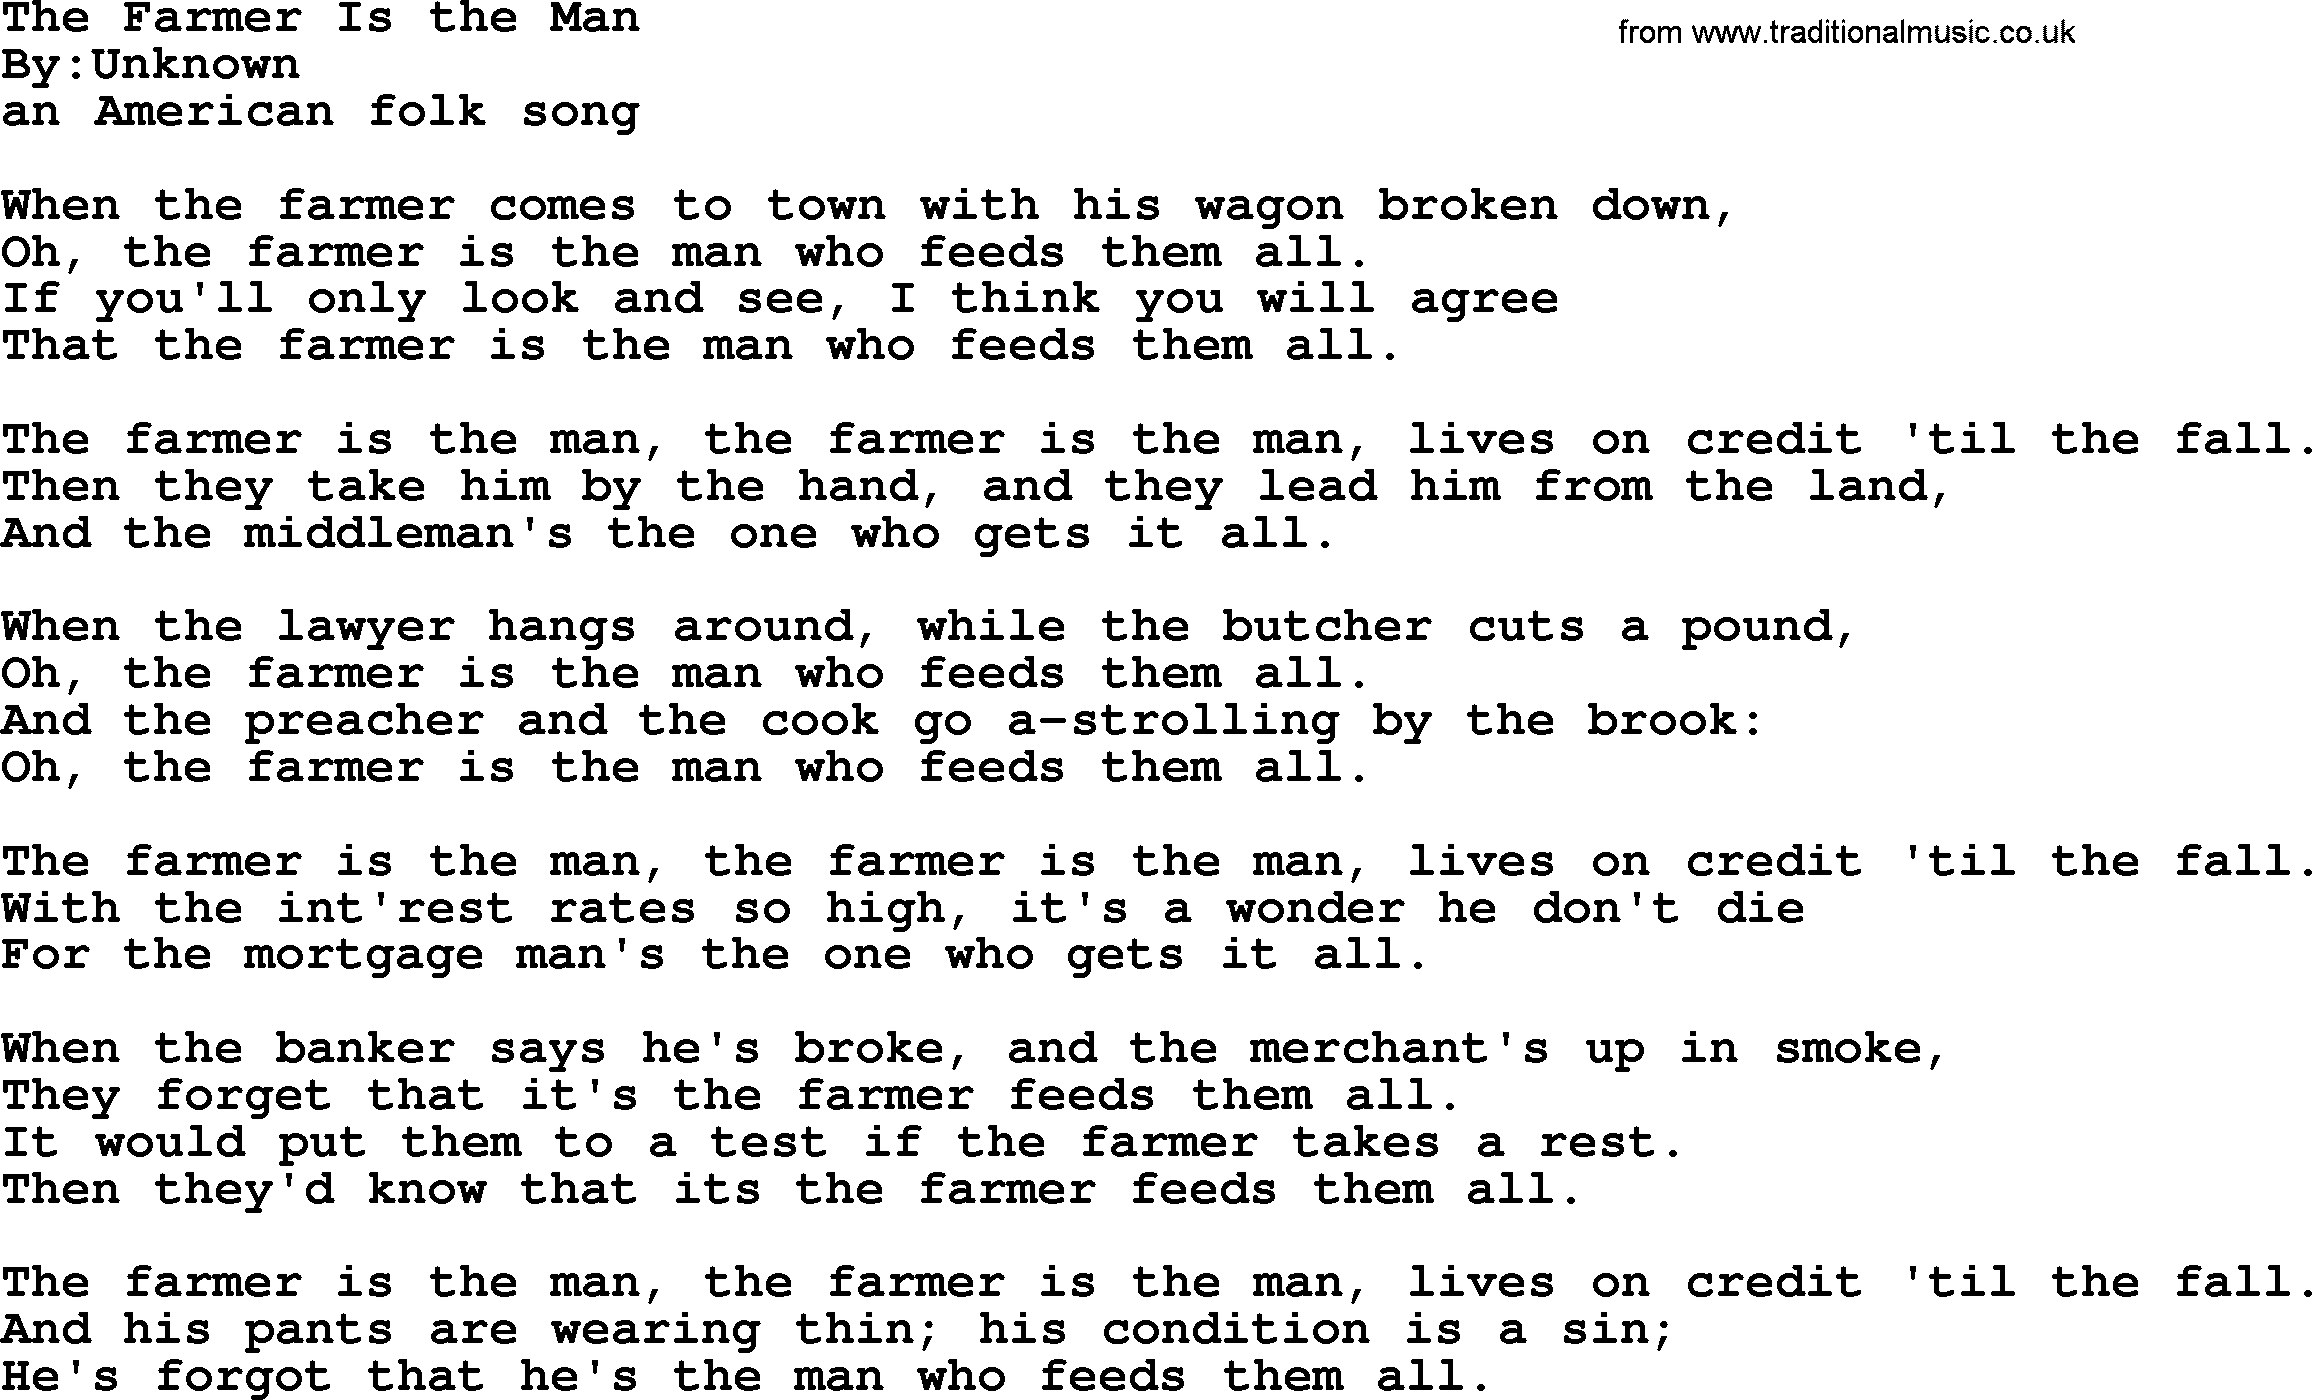 Political, Solidarity, Workers or Union song: The Farmer Is The Man, lyrics